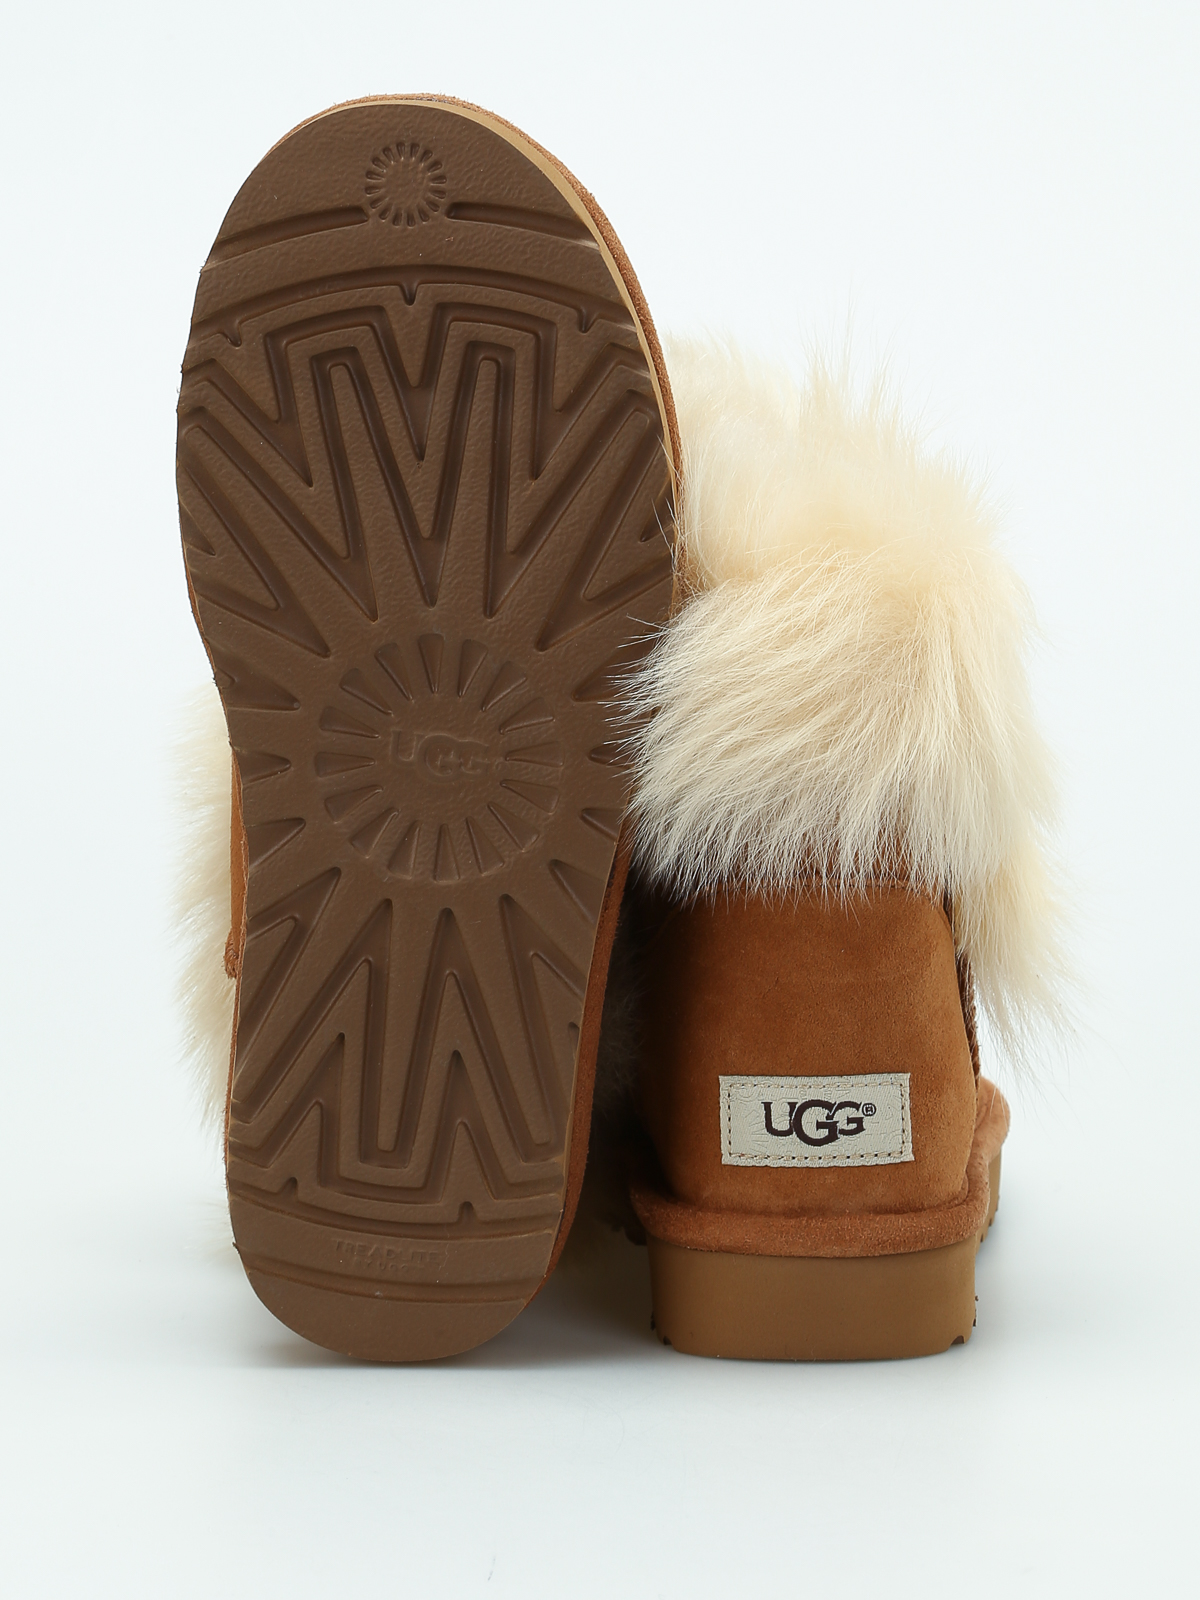 Vergissing impuls Zwakheid Ankle boots Ugg - Milla ankle boots - 1018303WCHE | Shop online at iKRIX